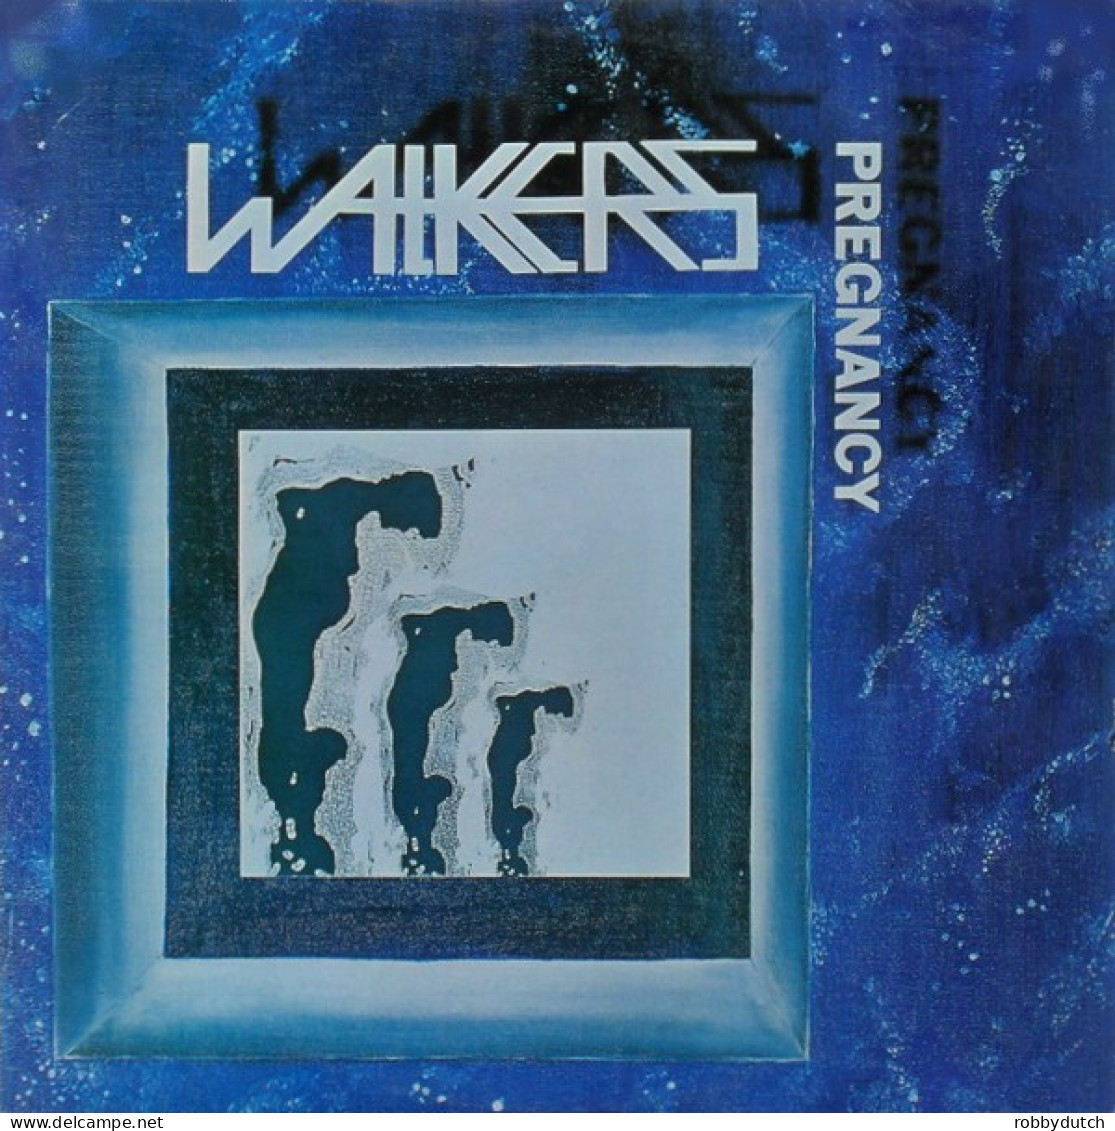 * LP *  THE WALKERS - PREGNANCY (Holland 1979) - Country Et Folk